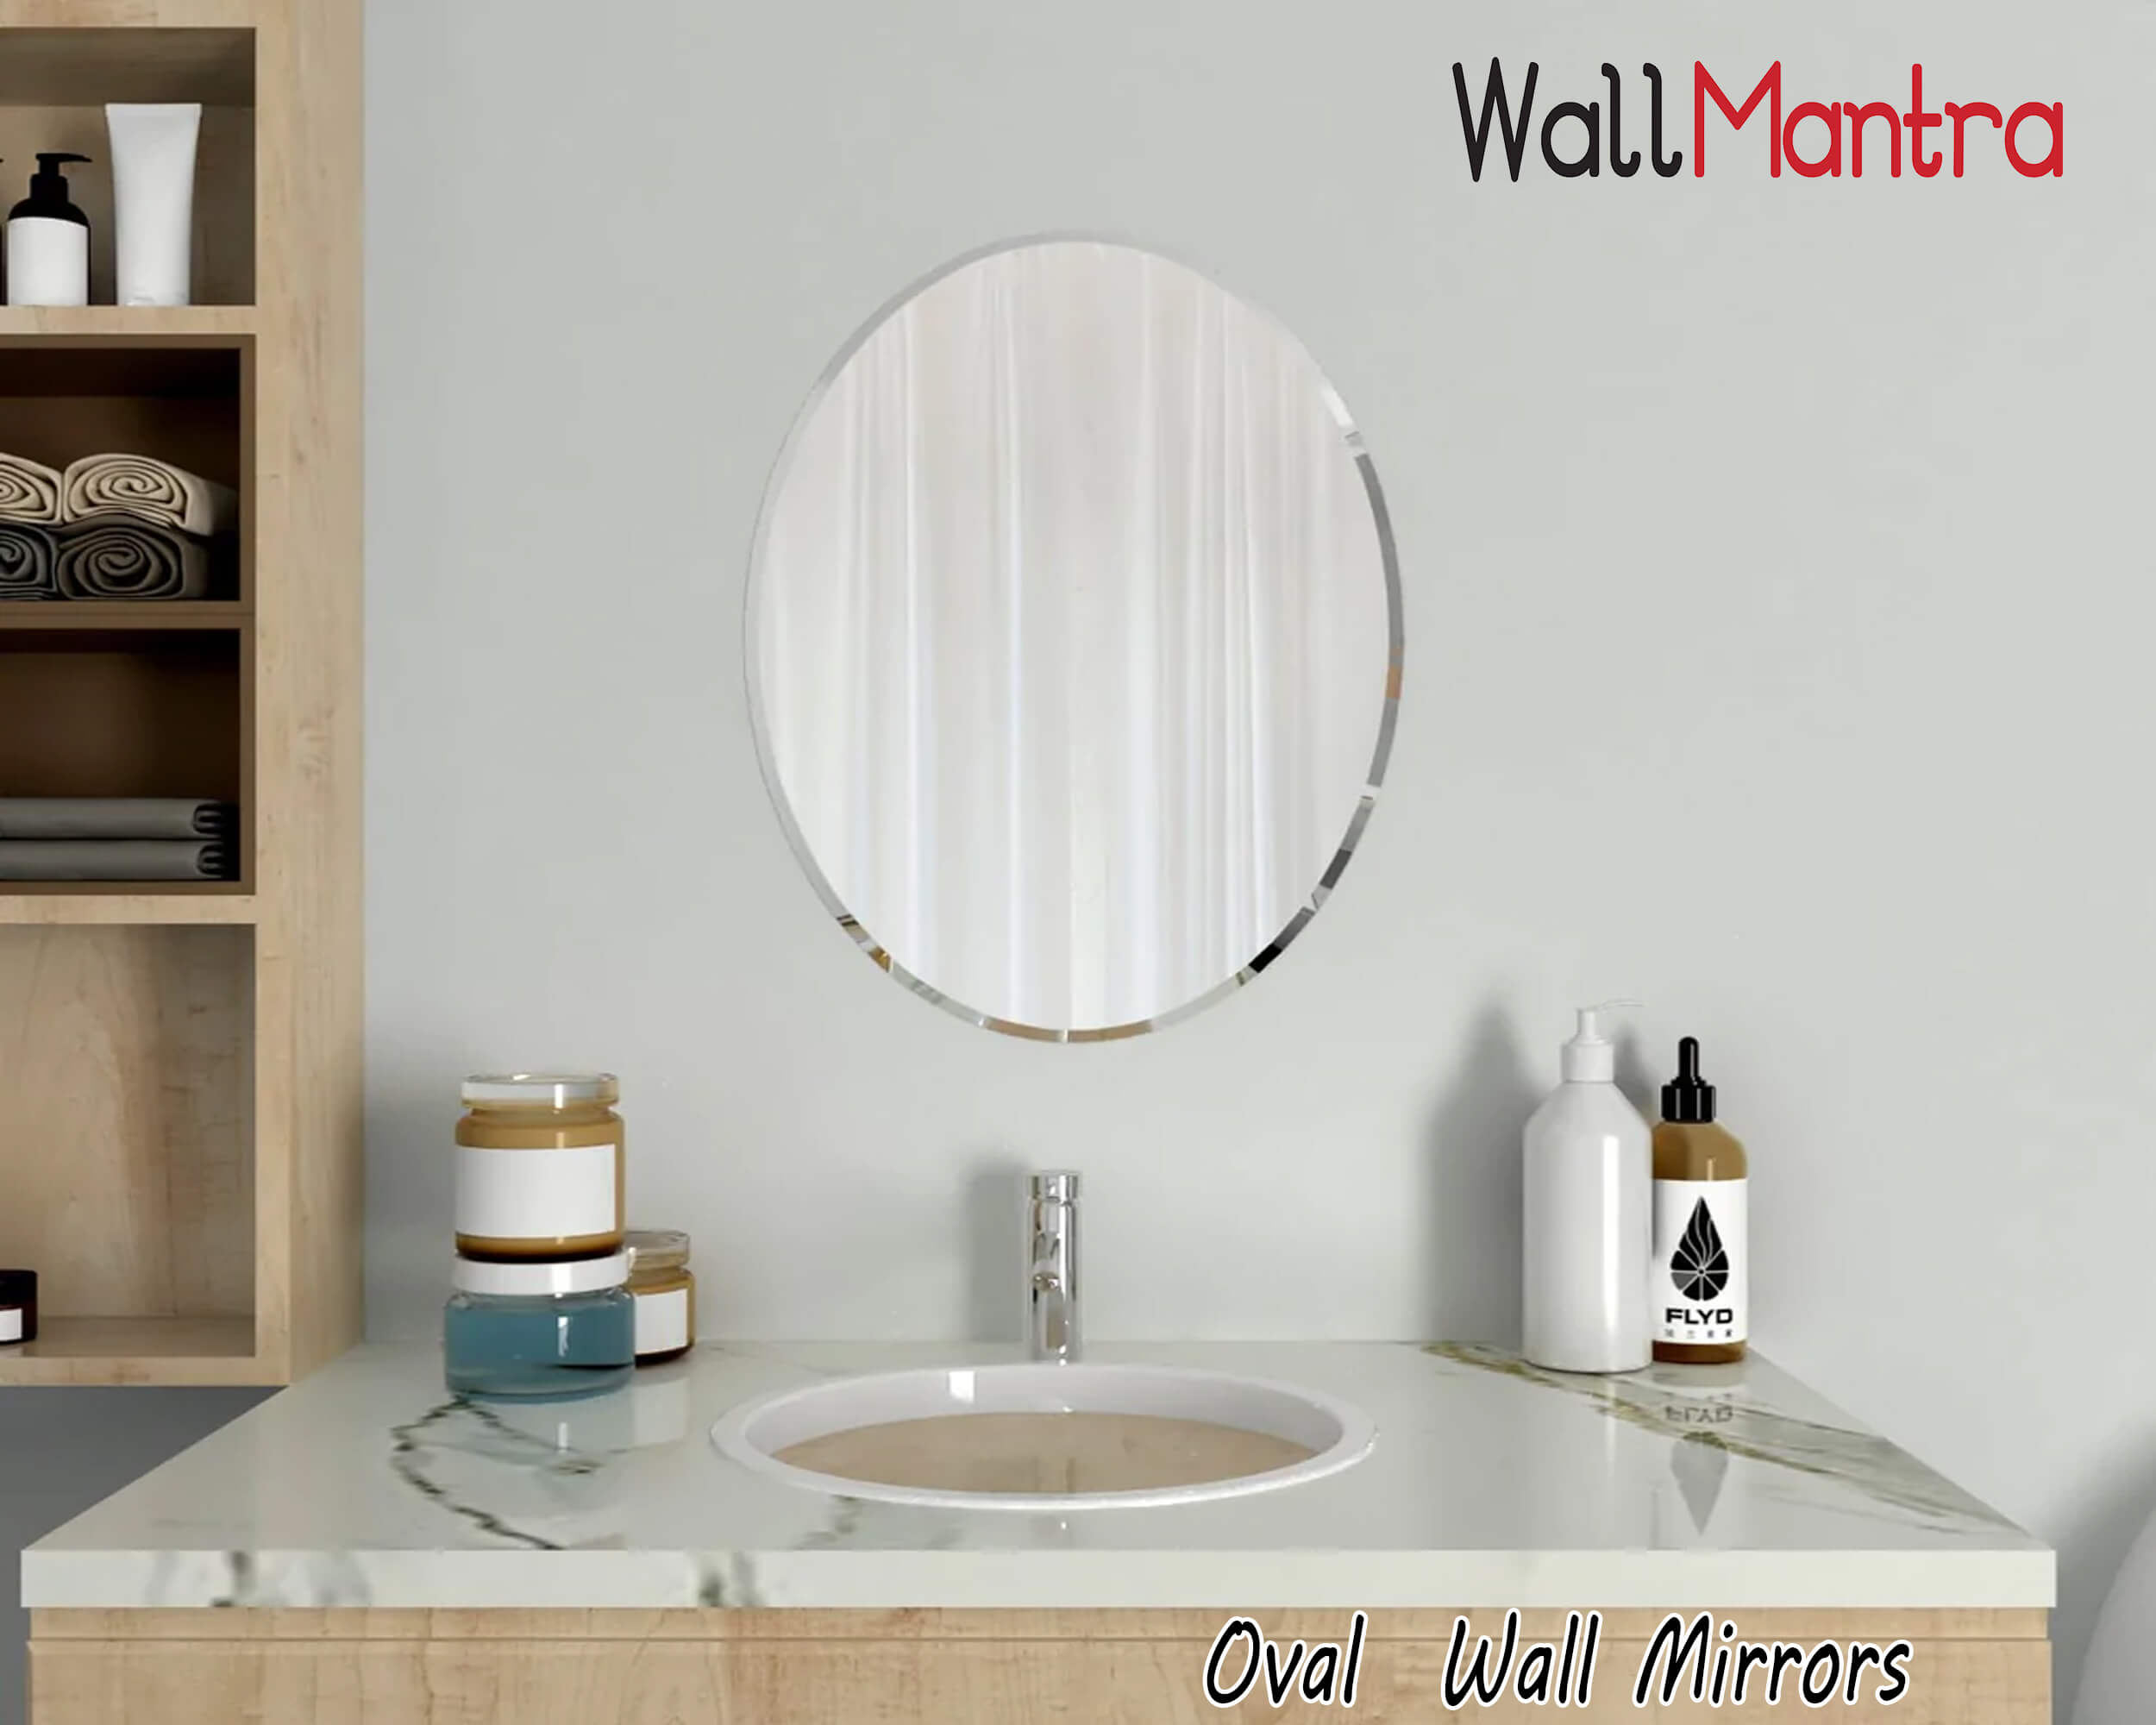 Introduce Brilliant and Gorgeous Wall Mirror Design to Attract Other People at Home/Office